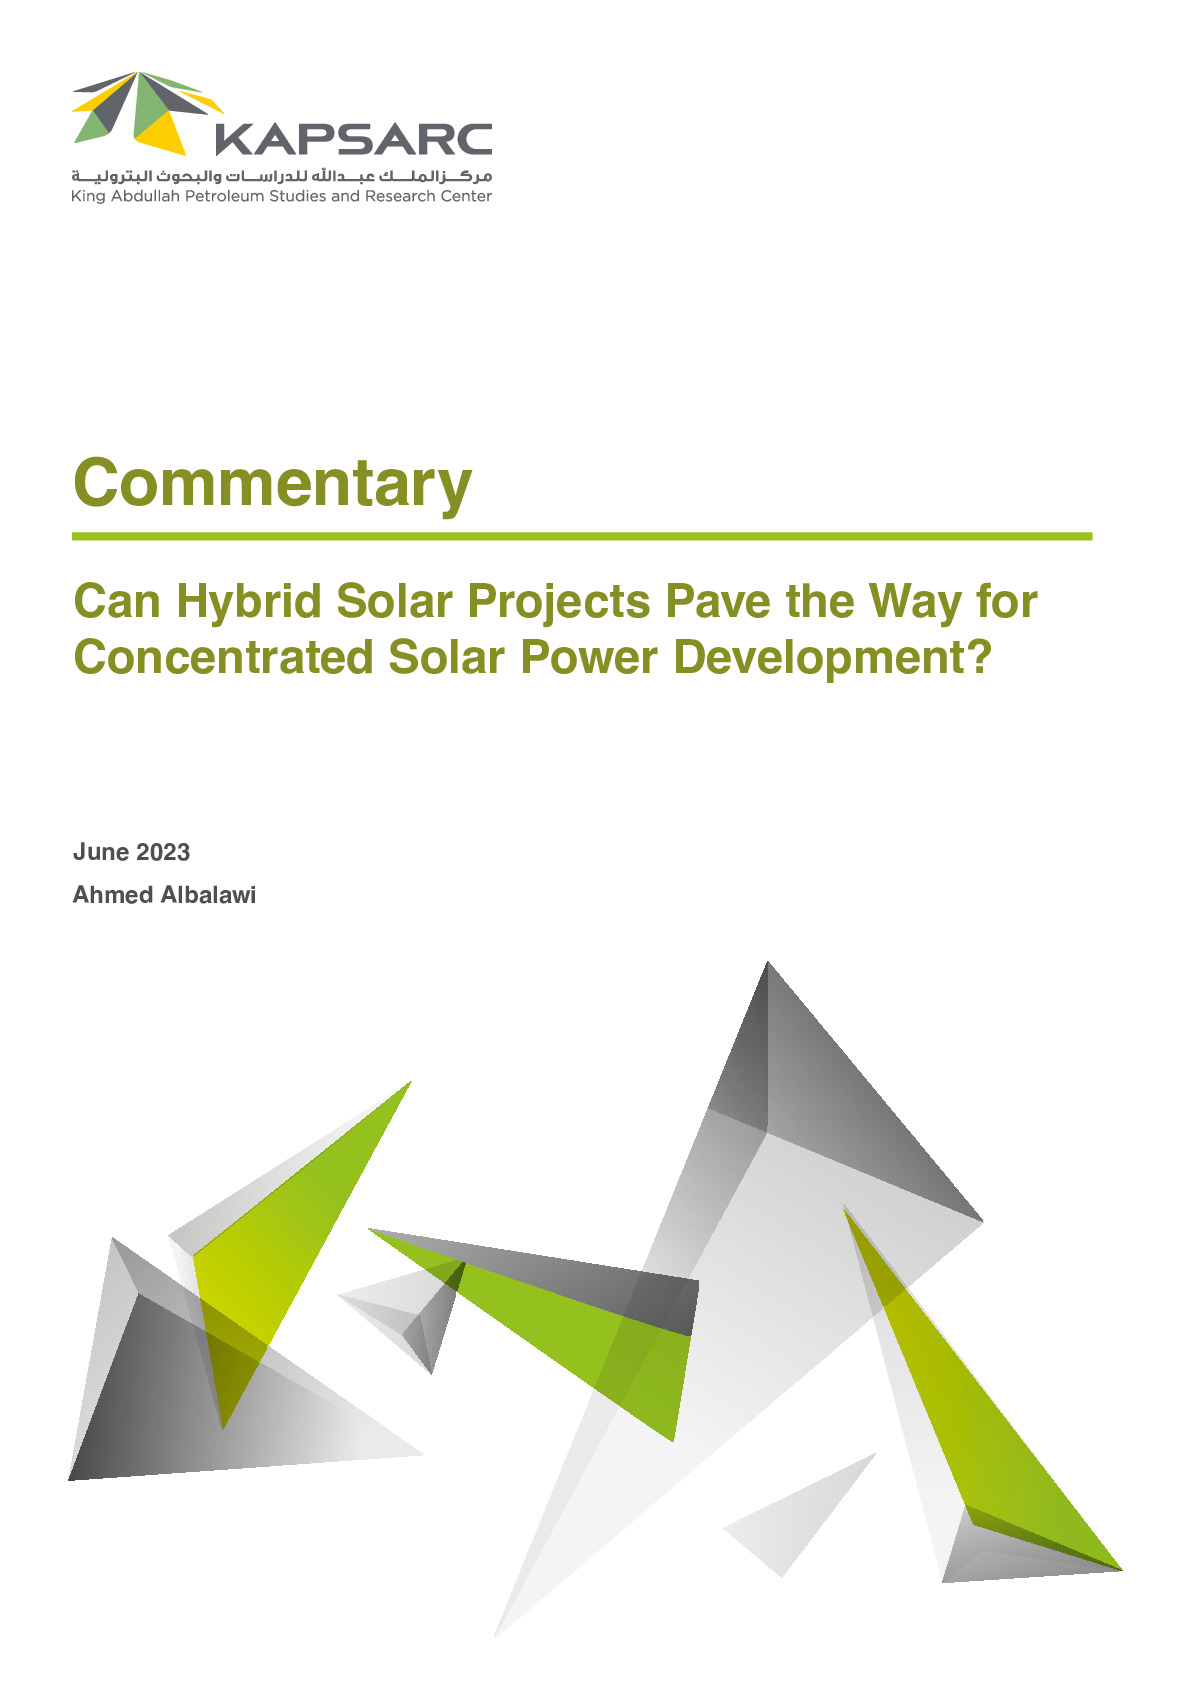 Can Hybrid Solar Projects Pave the Way for Concentrated Solar Power Development?